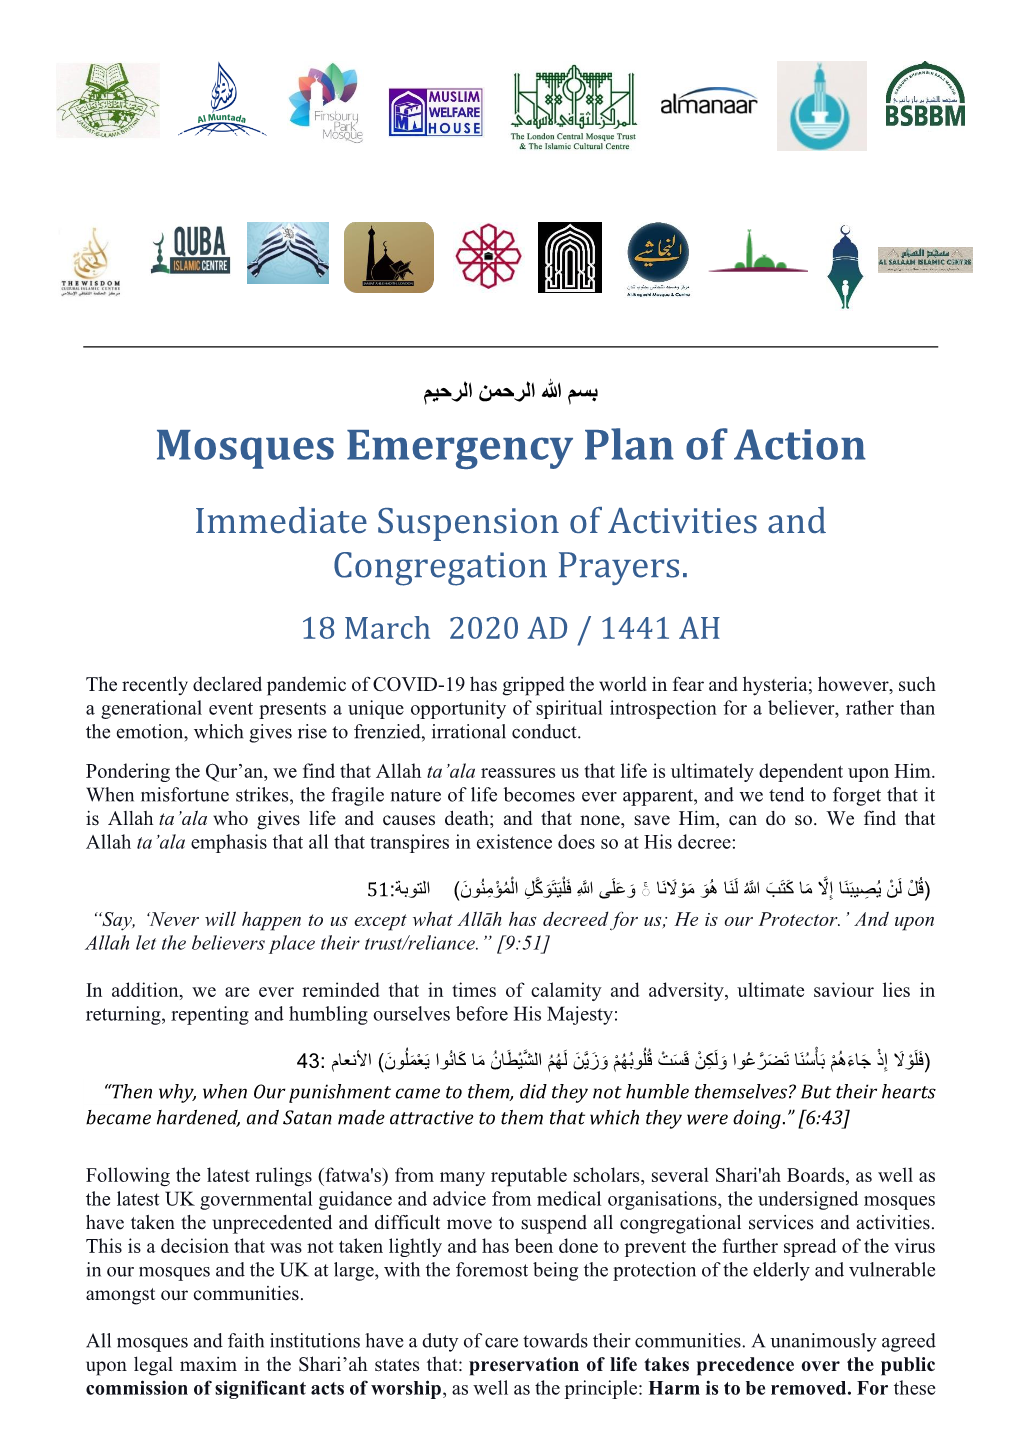 Mosques Emergency Plan of Action